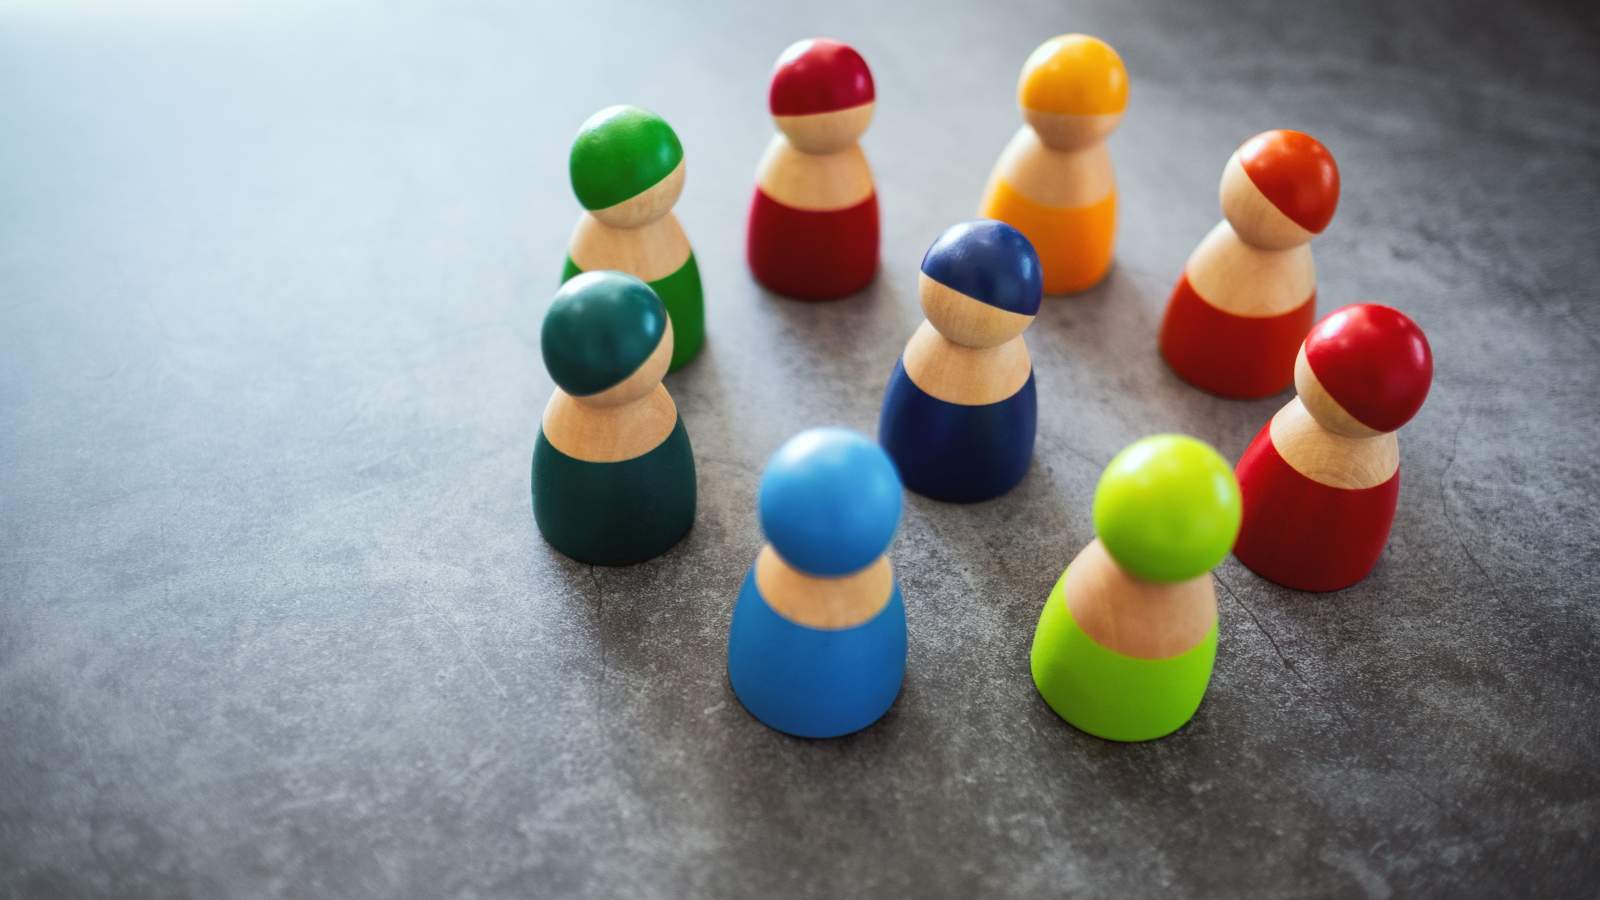 Diversity & Inclusion in the Workplace, and Why is it Important?